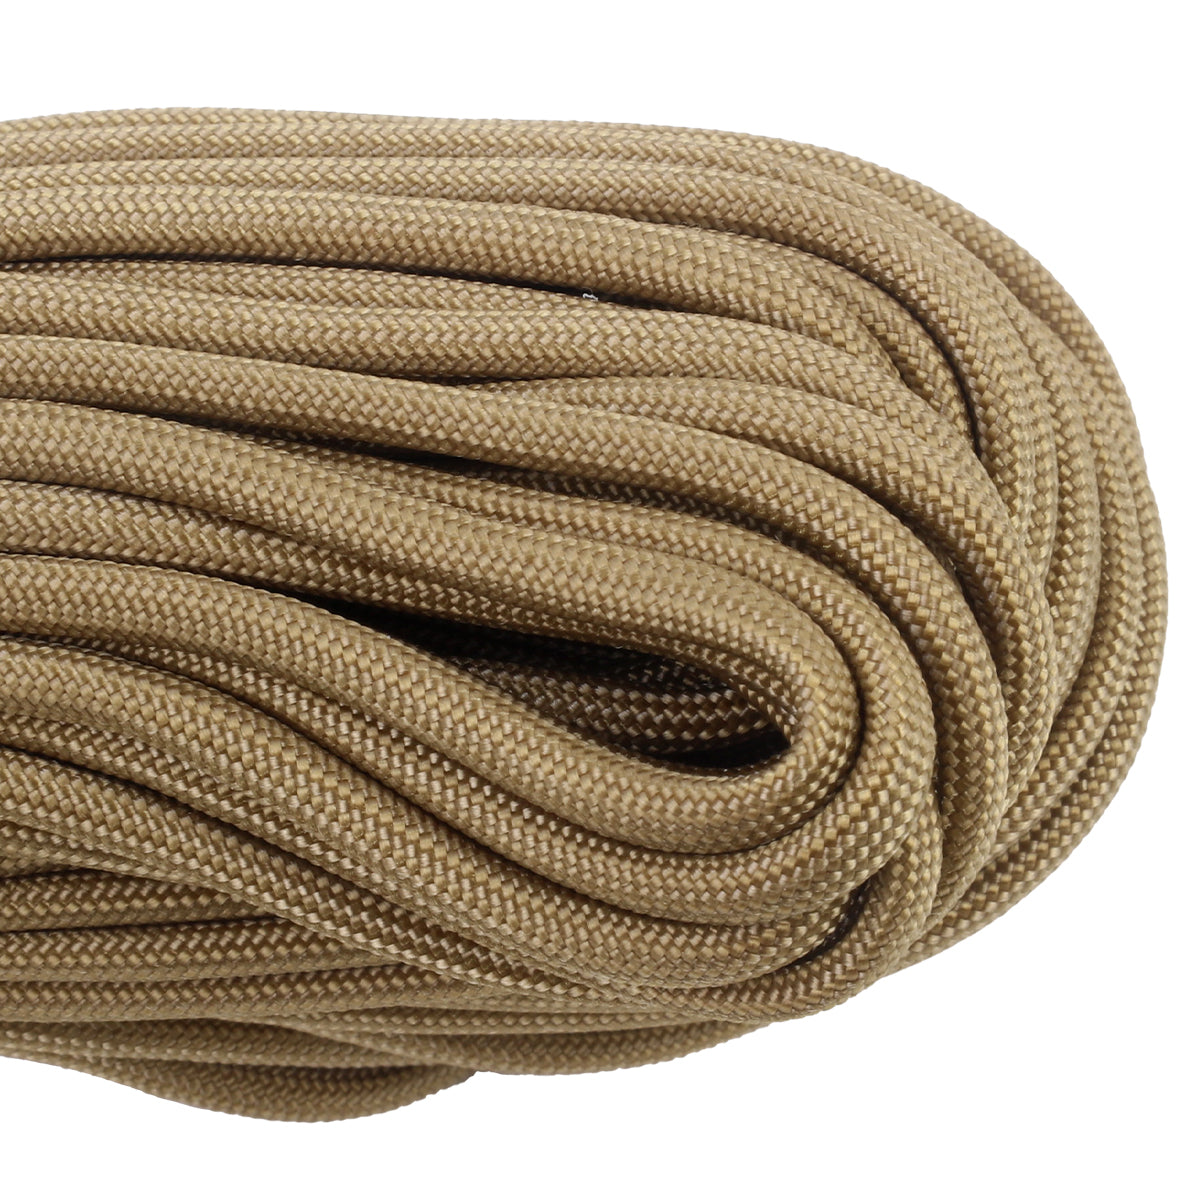 Atwood Rope MFG - 550 Paracord – Say Again Over